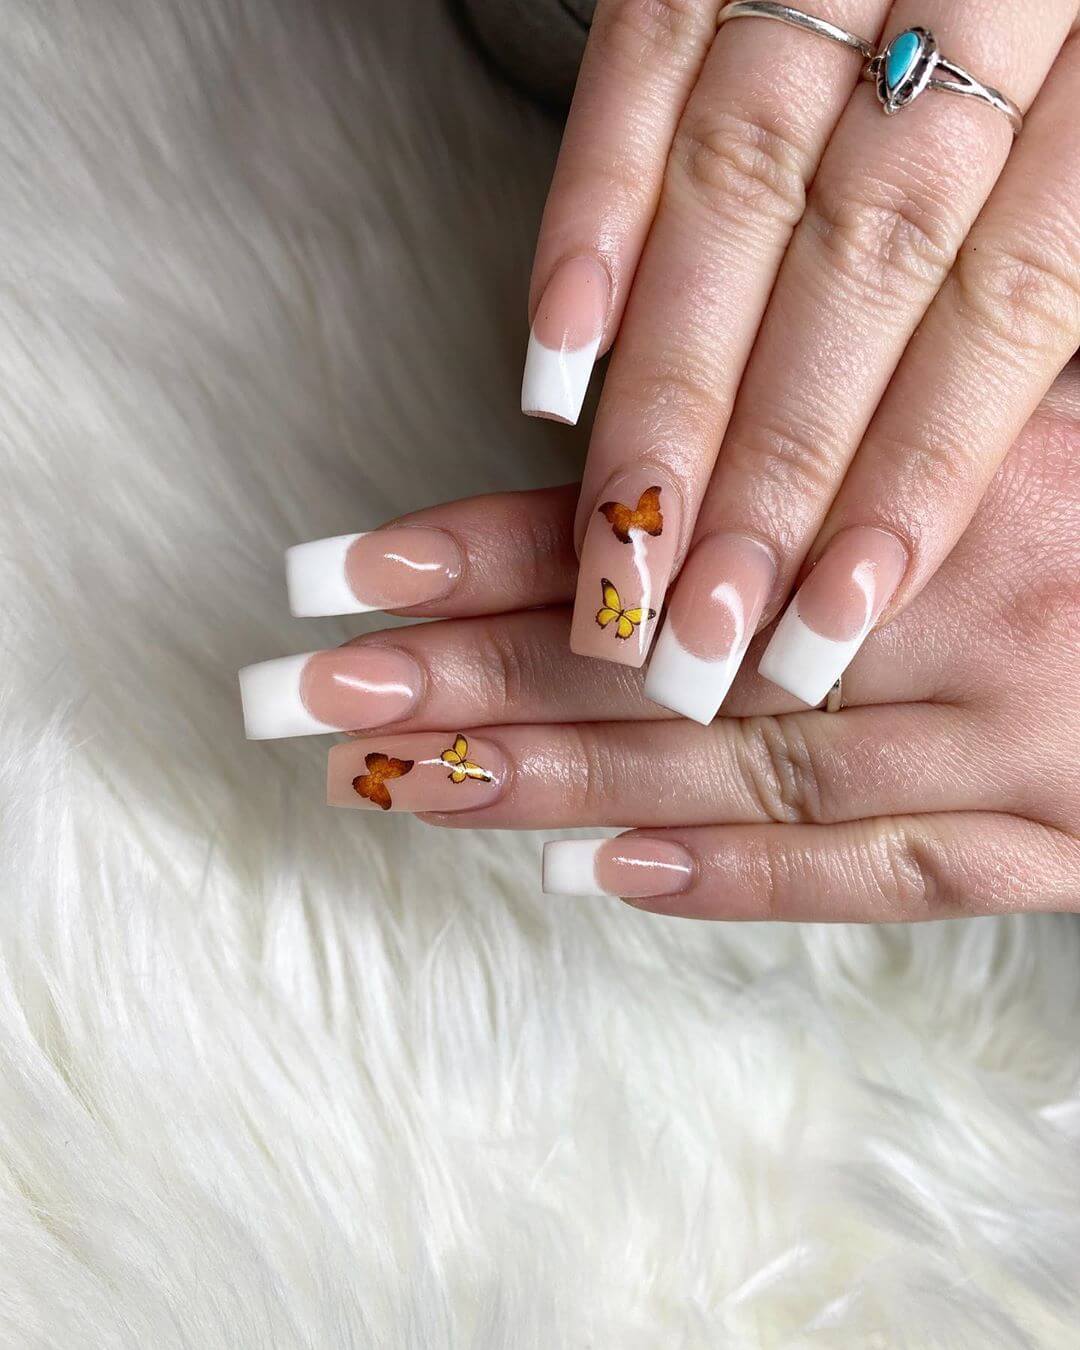 Simple And Sweet Office-Appropriate Nail Art